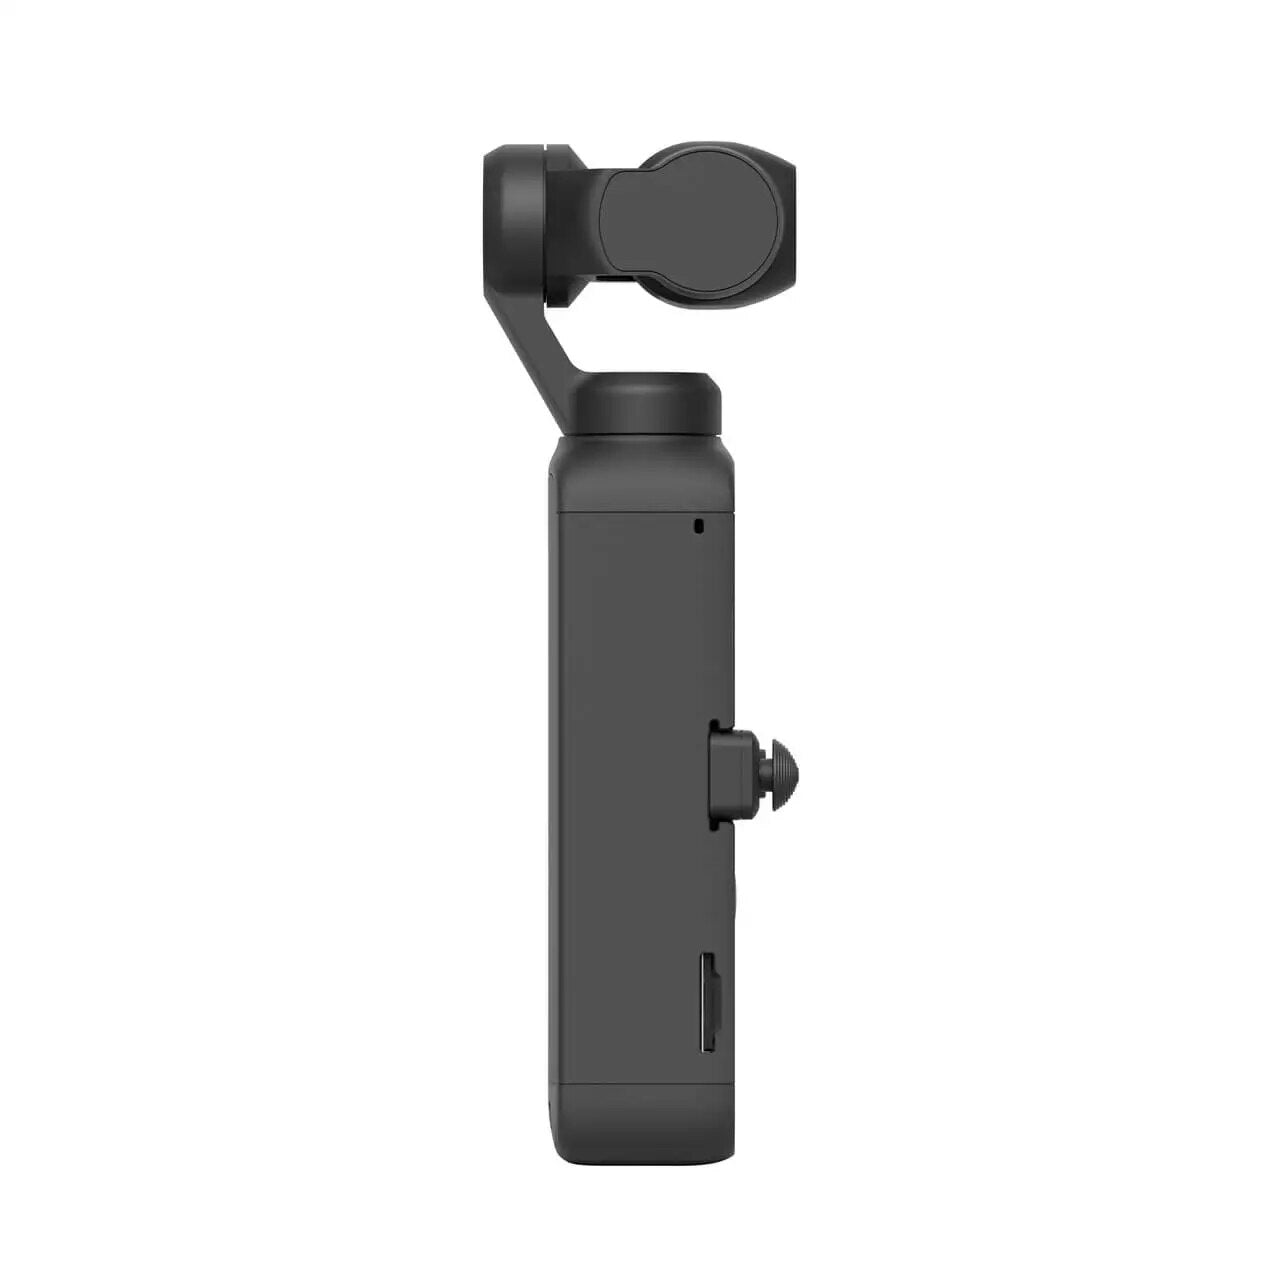 DJI Pocket 2 Combo - ActiveTrack 3.0 4K/60fps Video 3-Axis Stabilization 64MP Photo Automatic Editing 100% Original in Stock